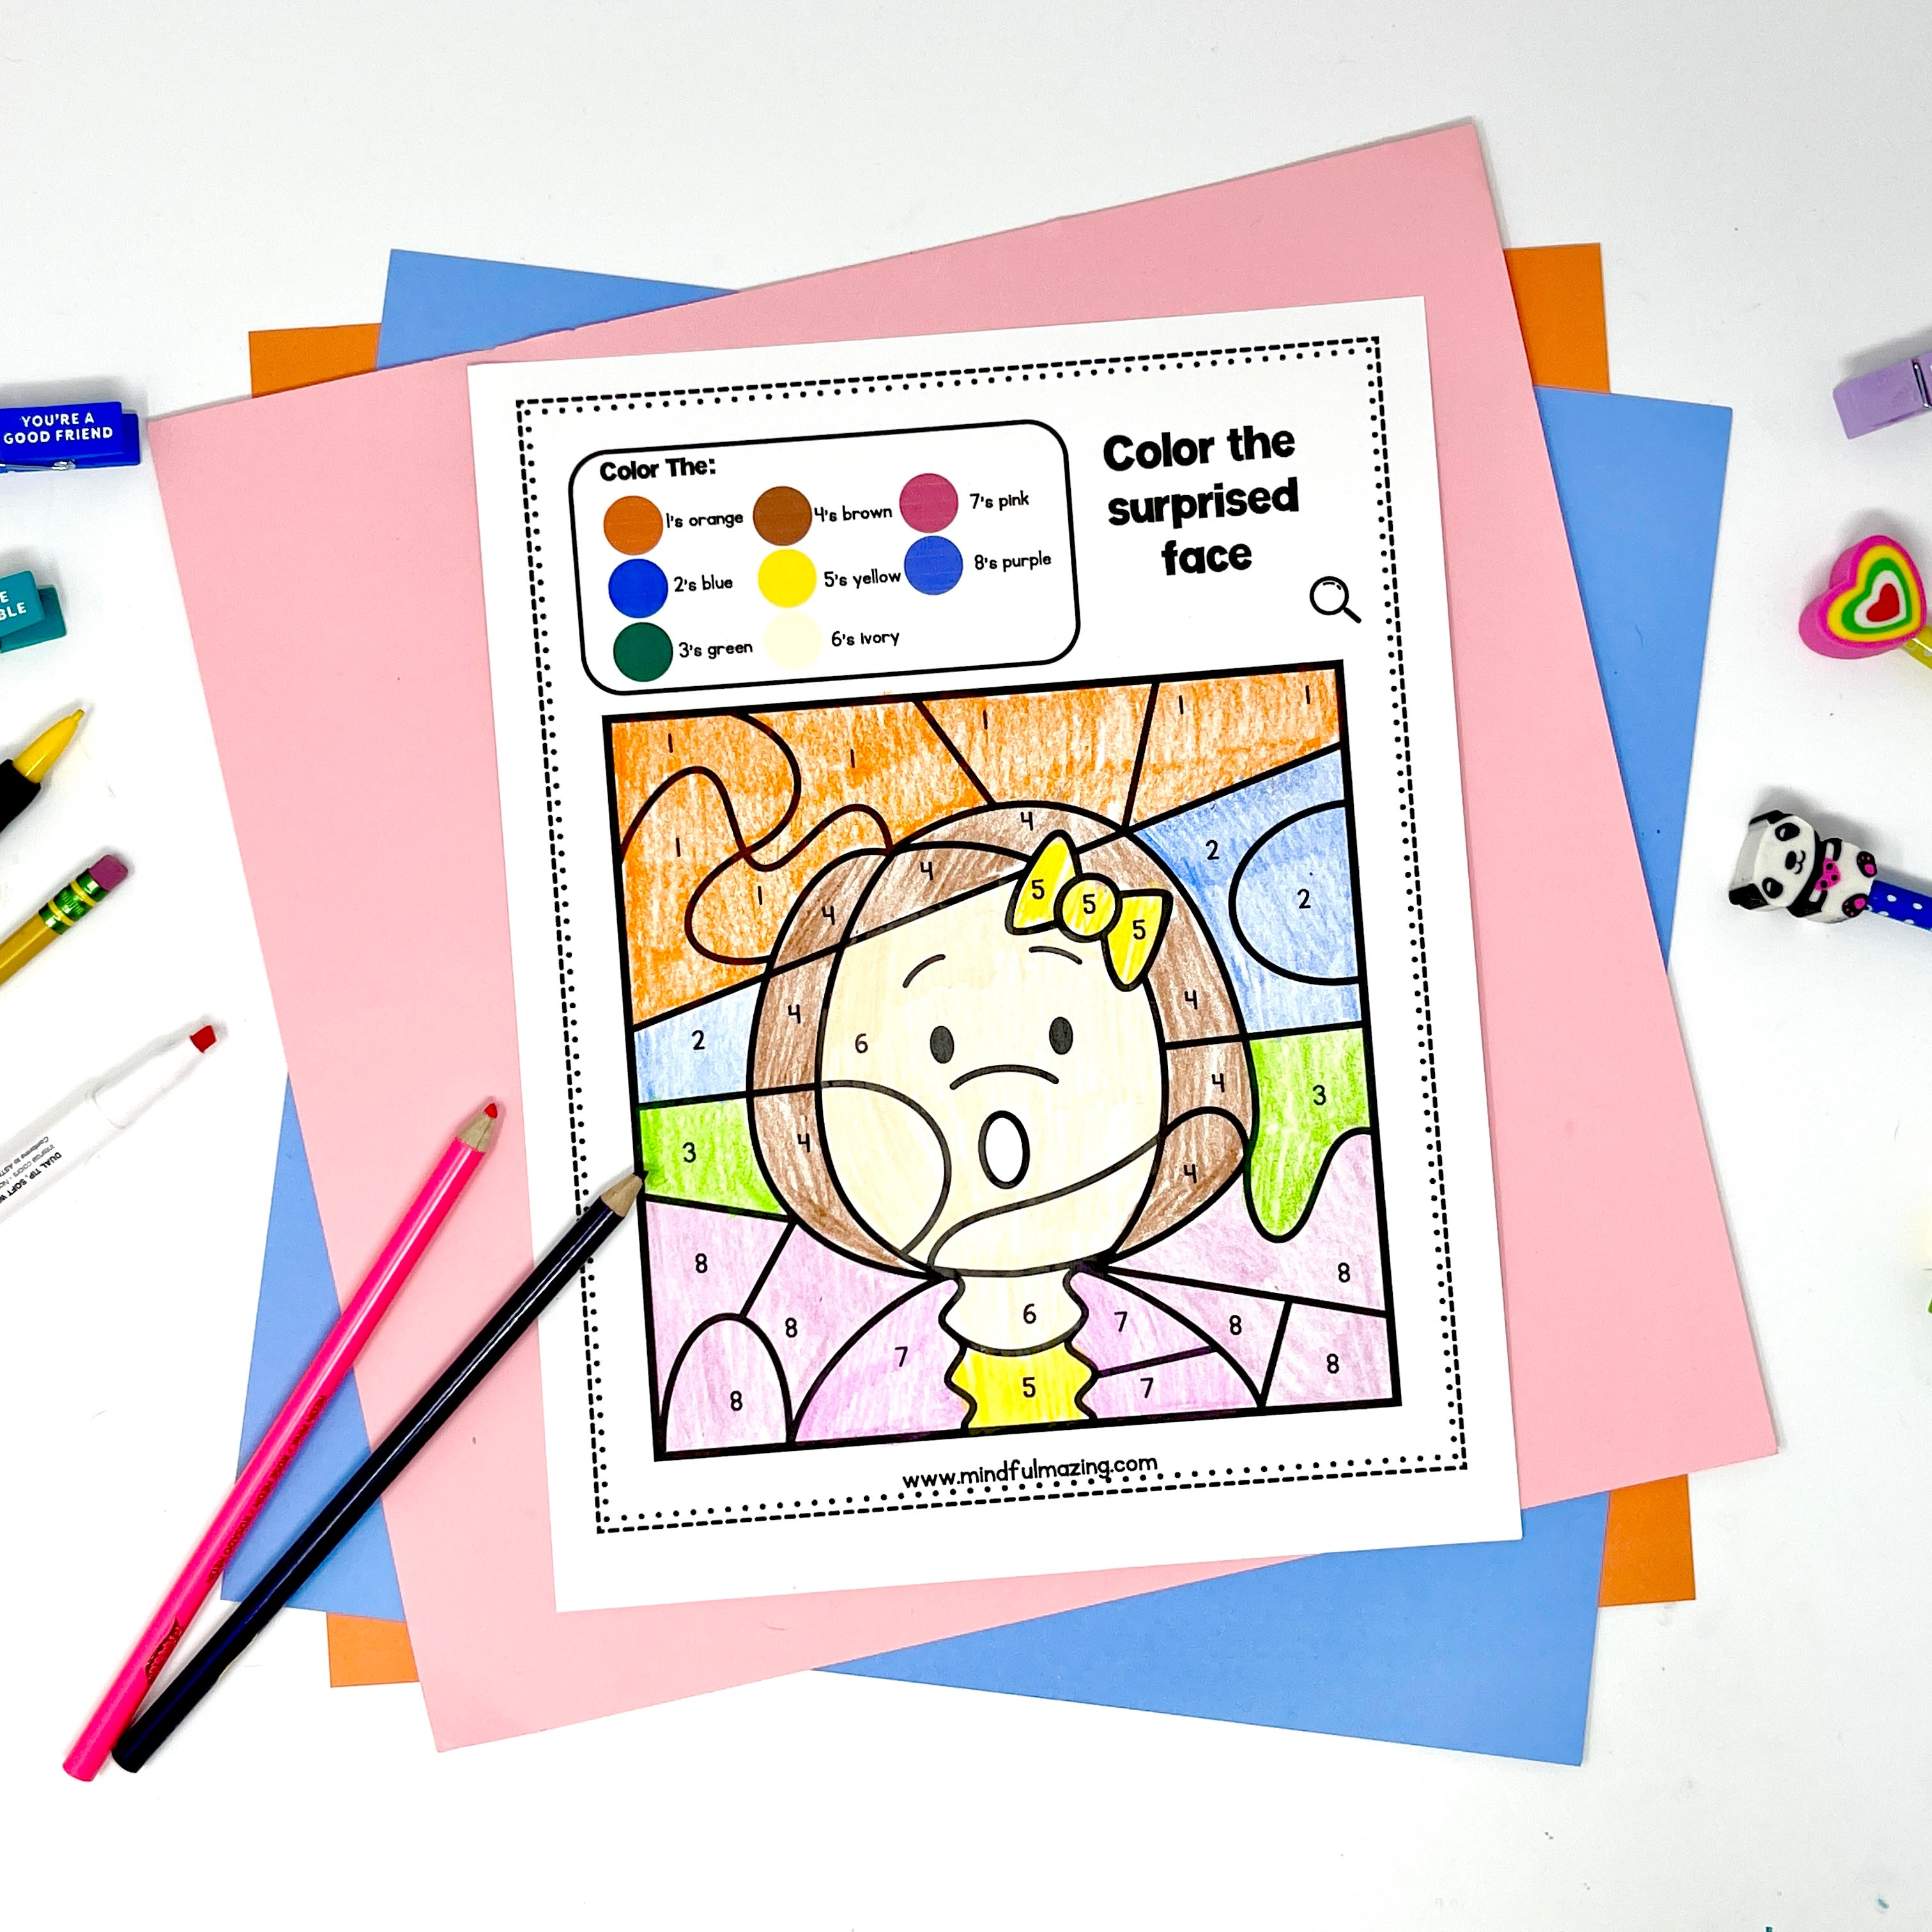 Emotions and Feelings Social Emotional Learning Unit (ages 3 - 8)